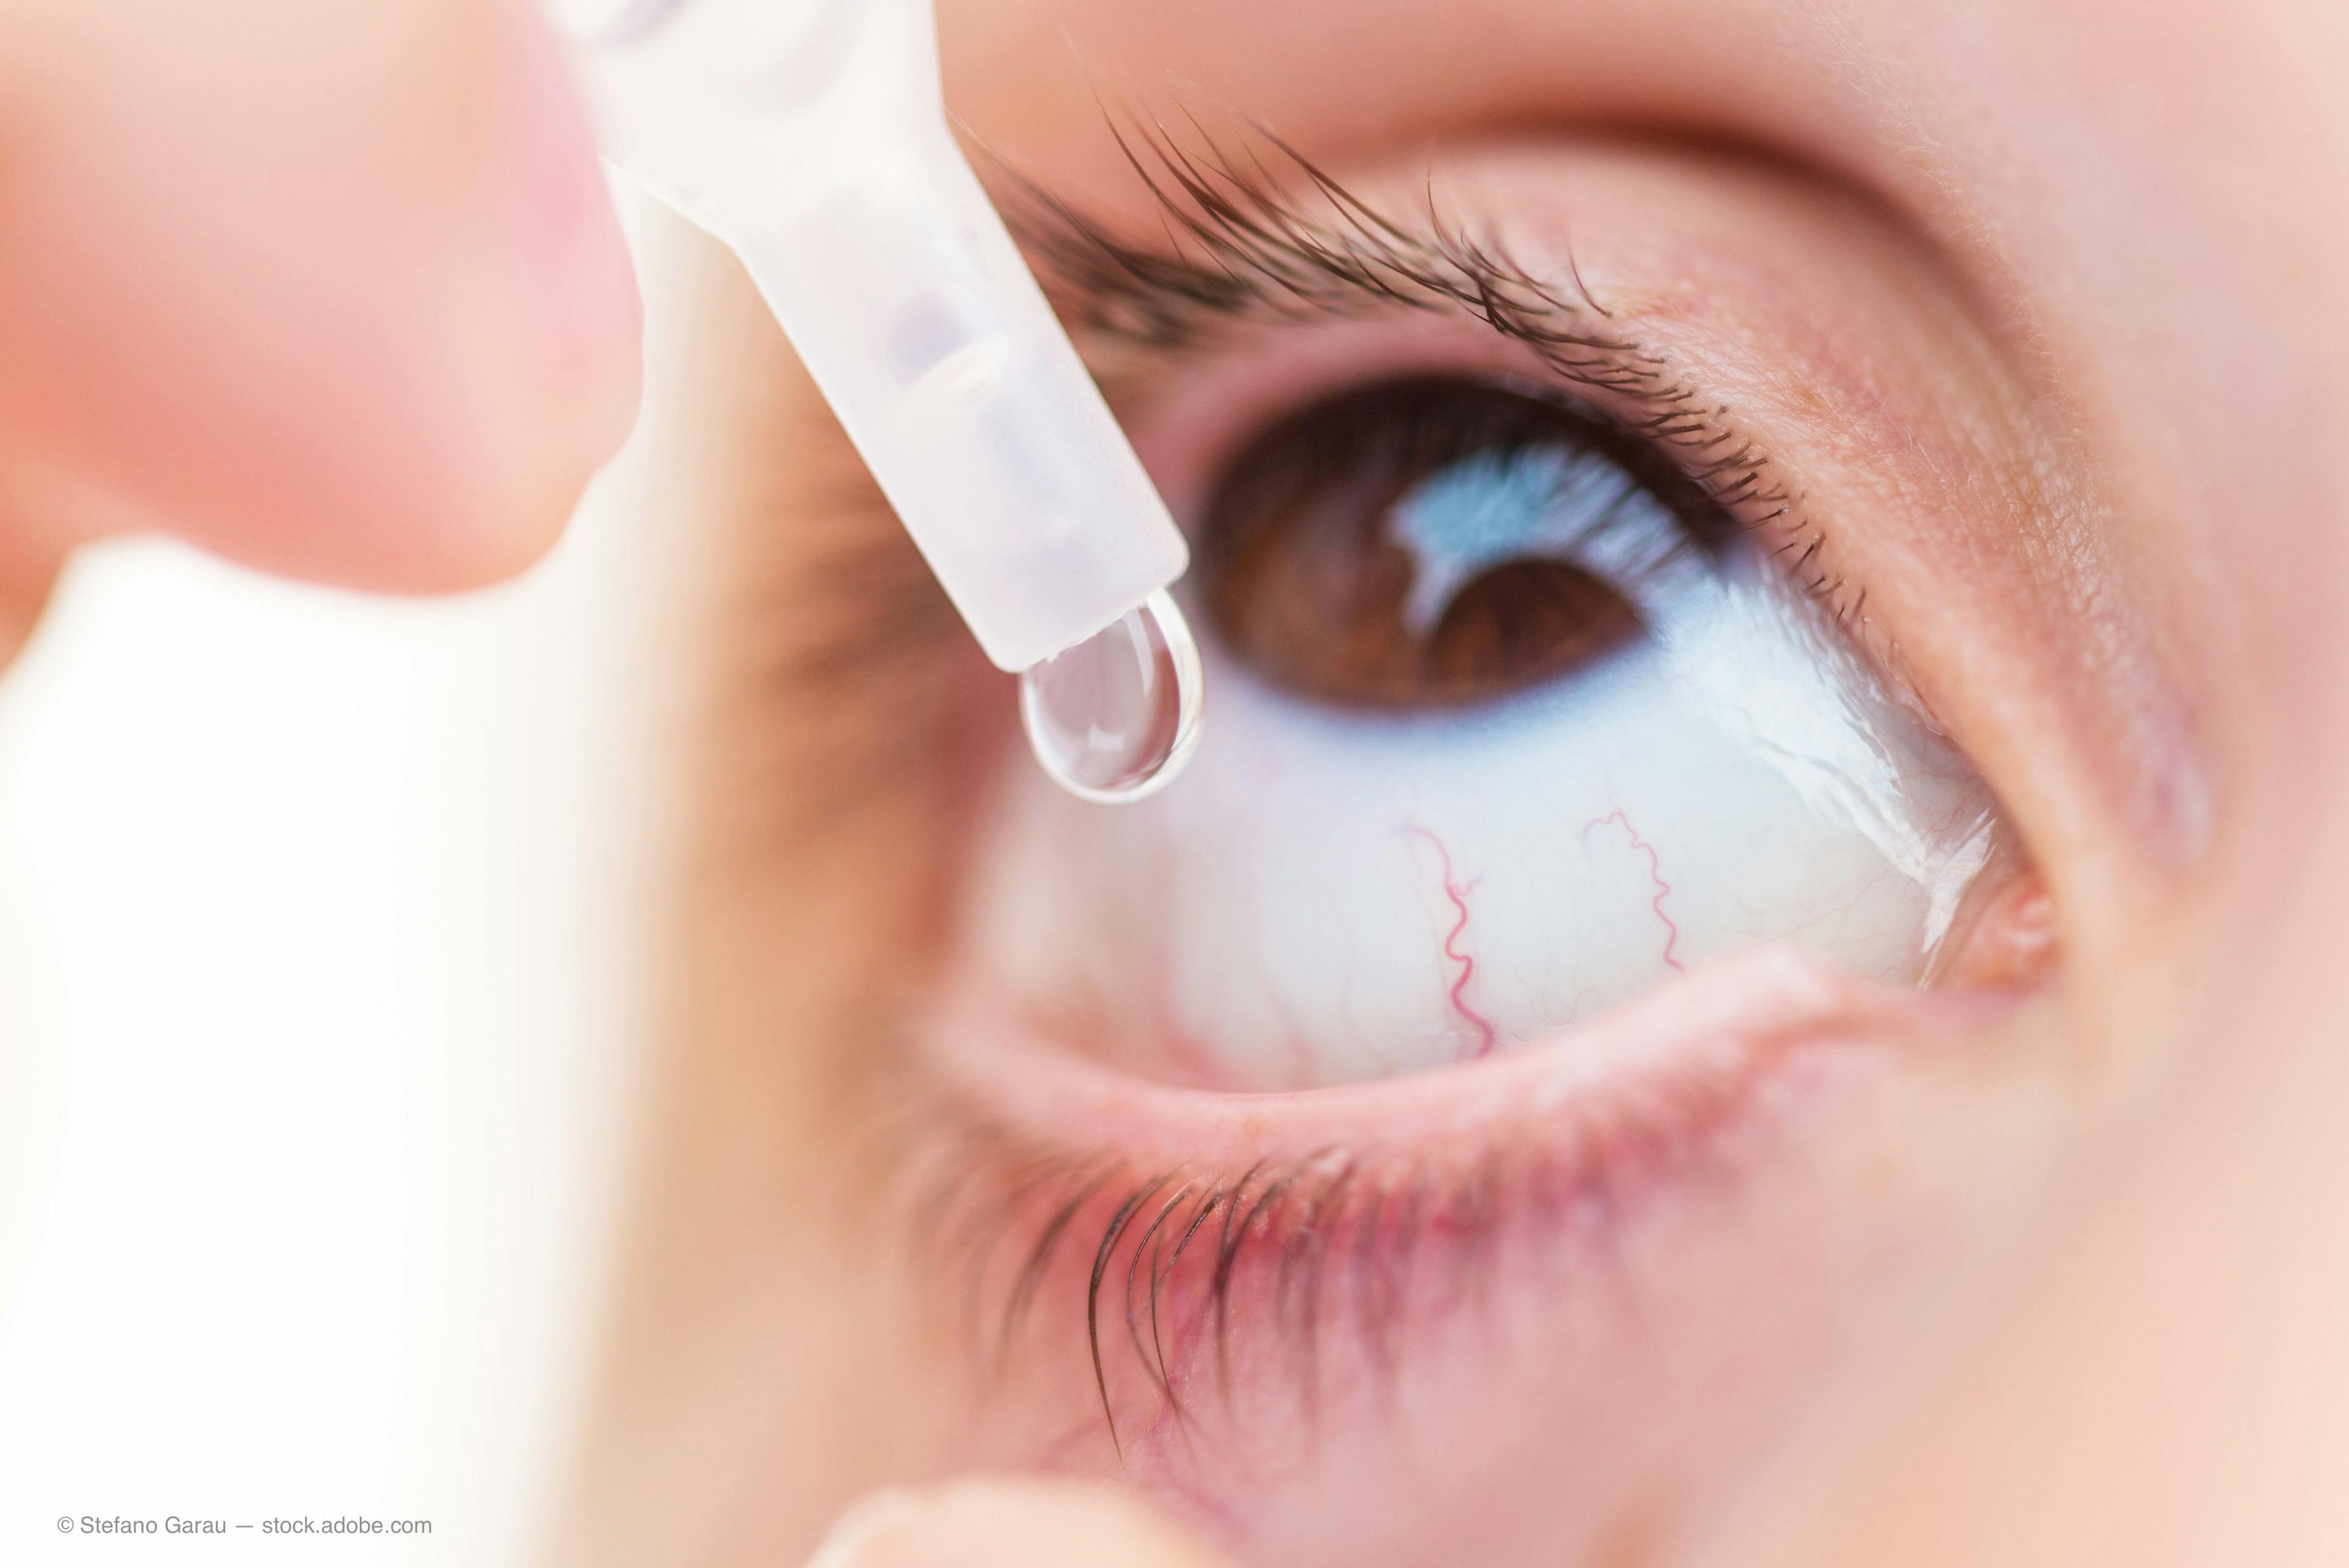  Aerie Pharmaceuticals announced Monday that the first patient has been dosed in the phase 3 registrational “COMET-3” study evaluating AR-15513 ophthalmic solution for the treatment of dry eye disease (DED).